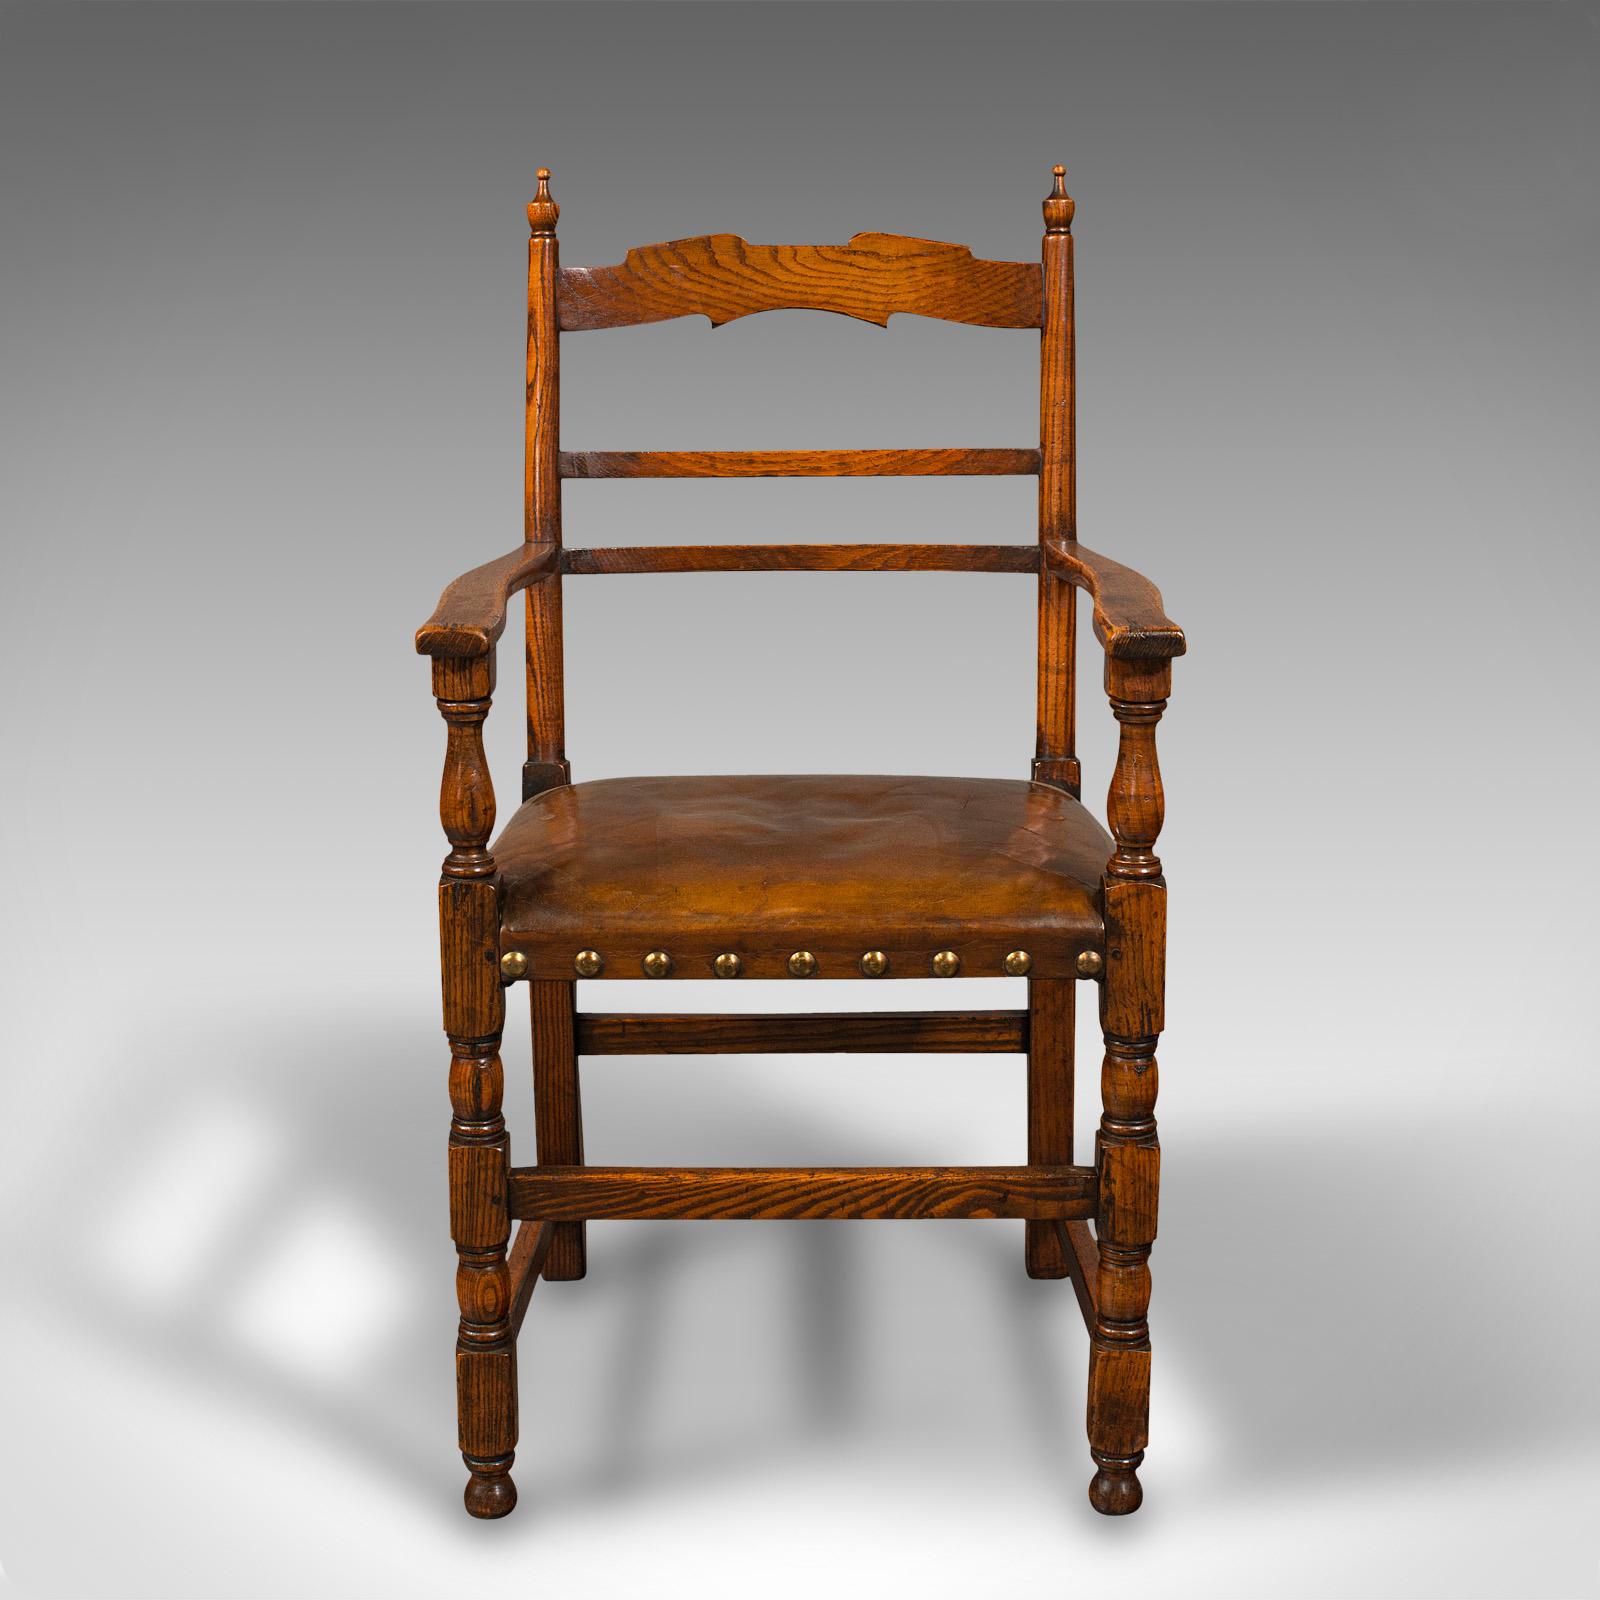 This is a set of 8 antique dining chairs. An English, oak carver and seat with leather cushions, dating to the Edwardian period, circa 1910.

Graced with delightful oak stocks and of appealing comfort
Displays a desirable aged patina and in good